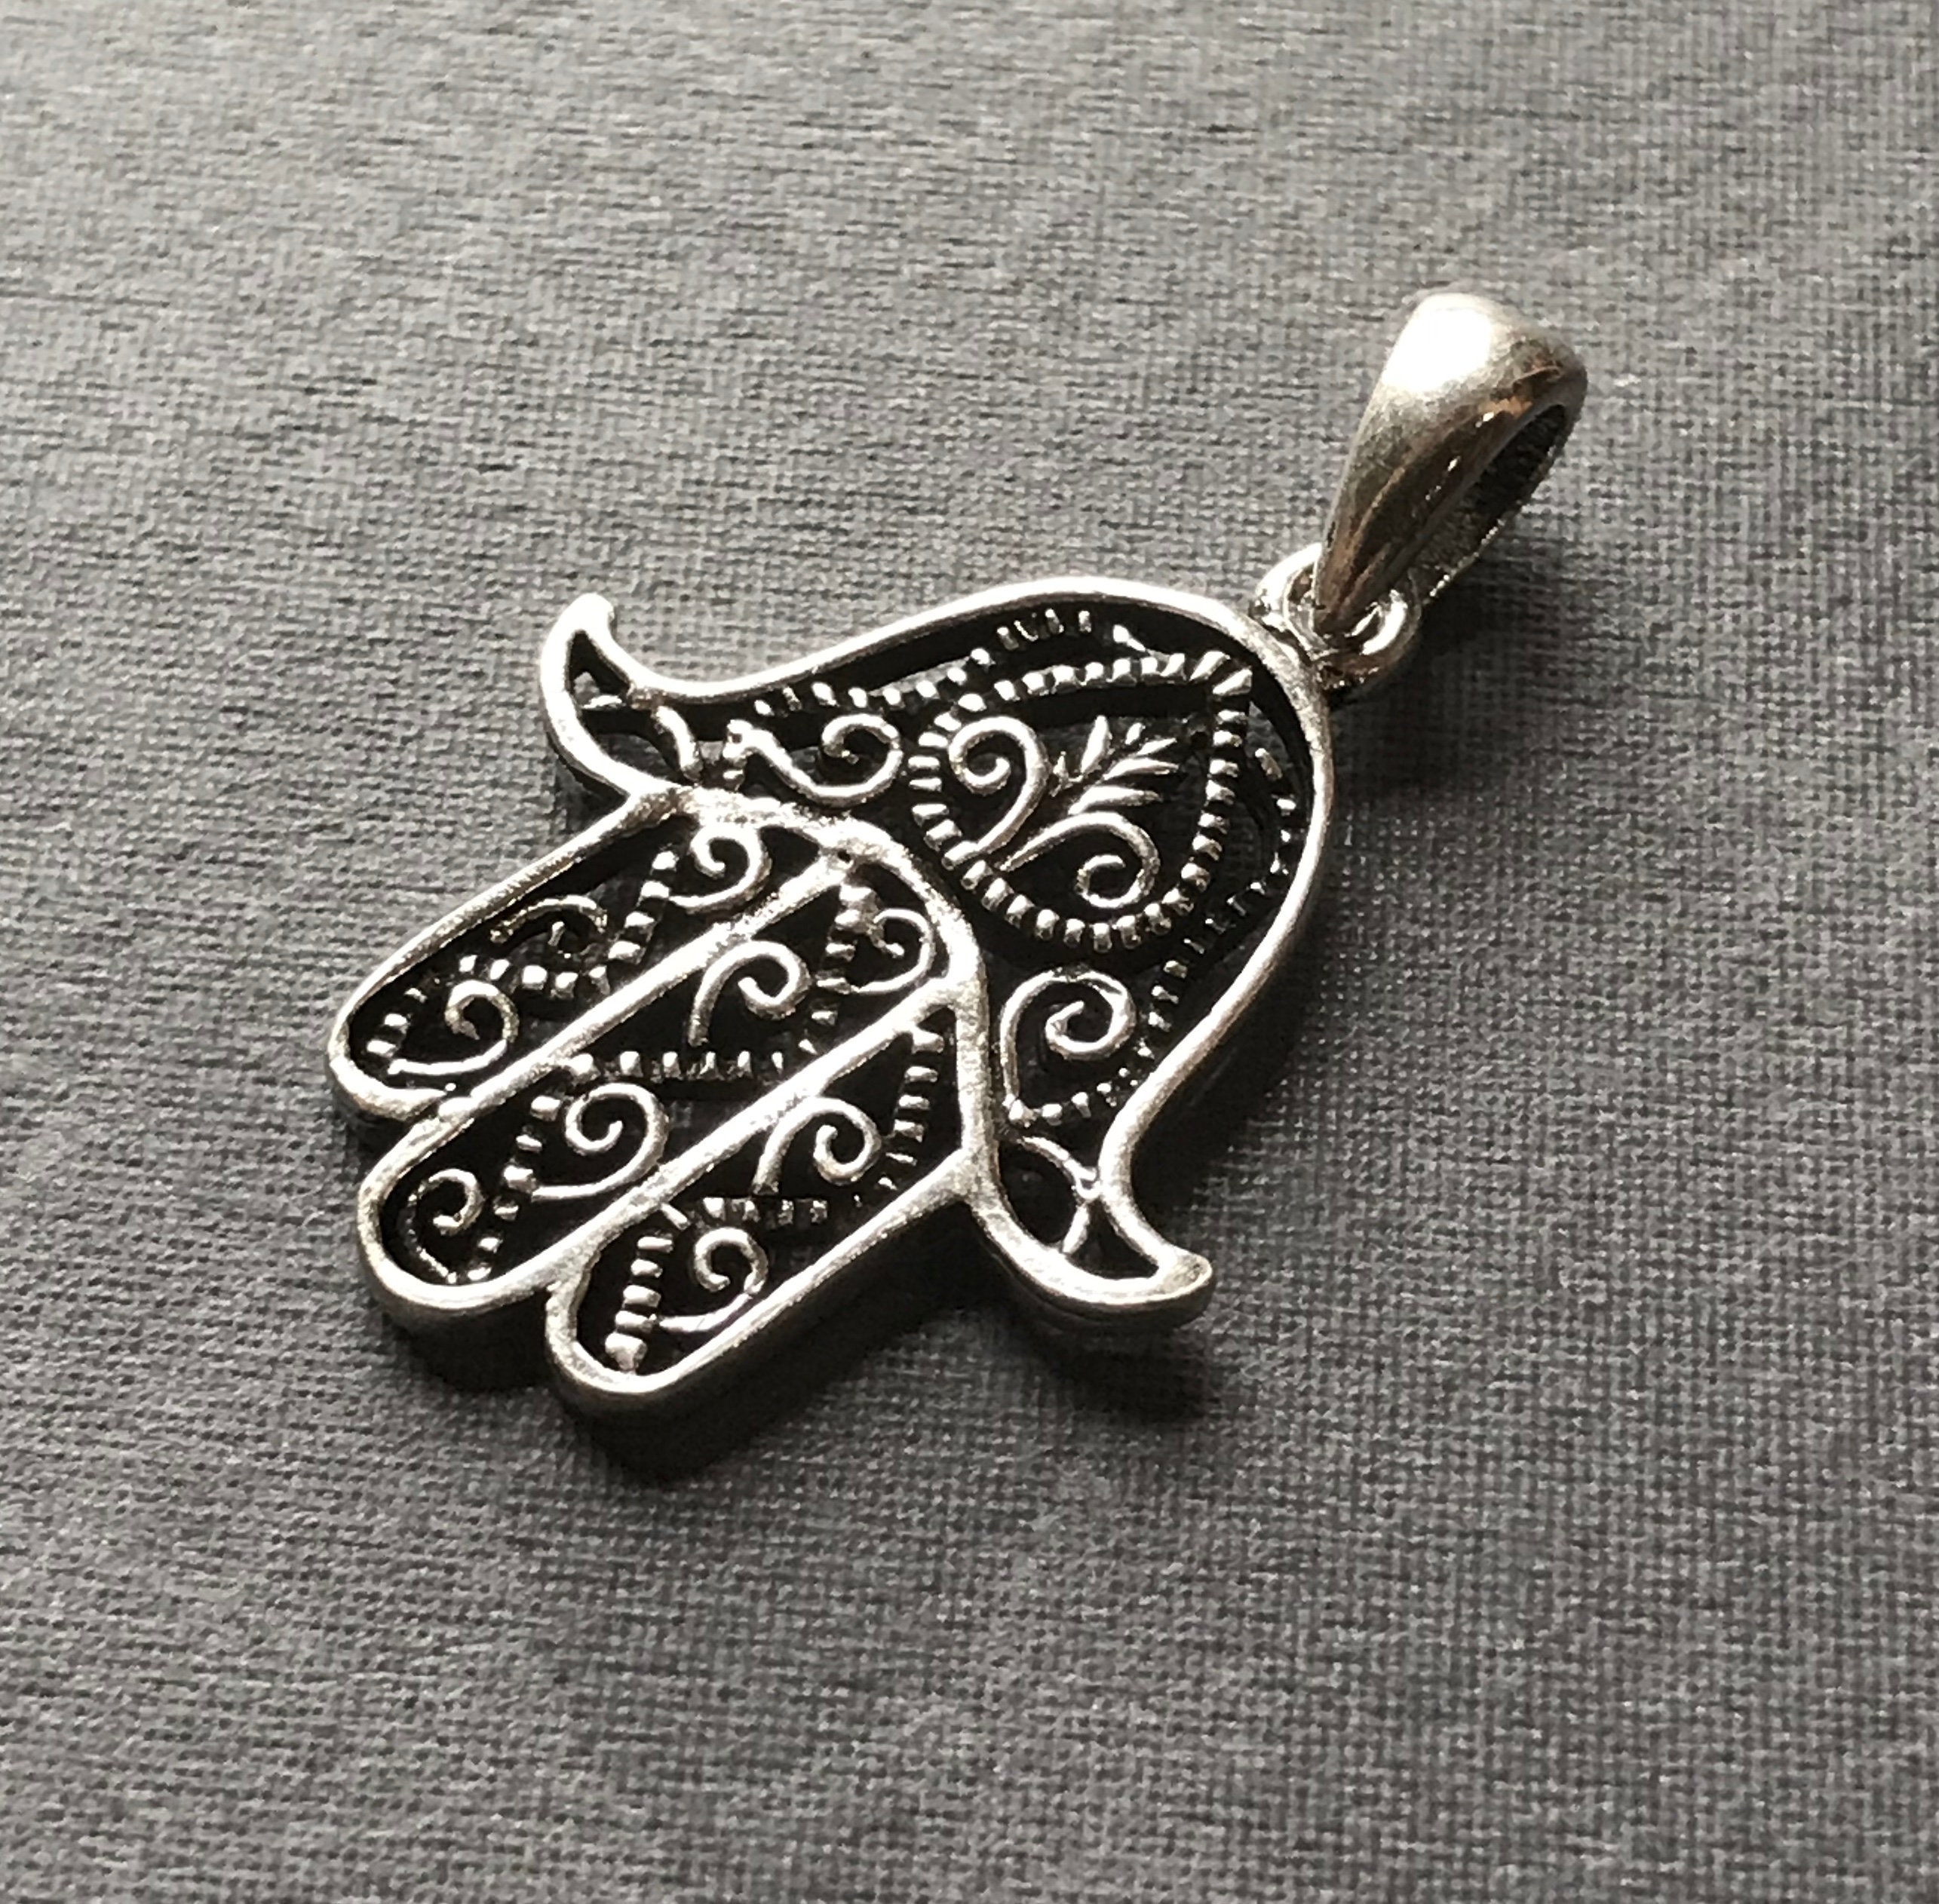 Hand of Fatima charm pendant - Solid Sterling Silver - 24mm X 23mm - large